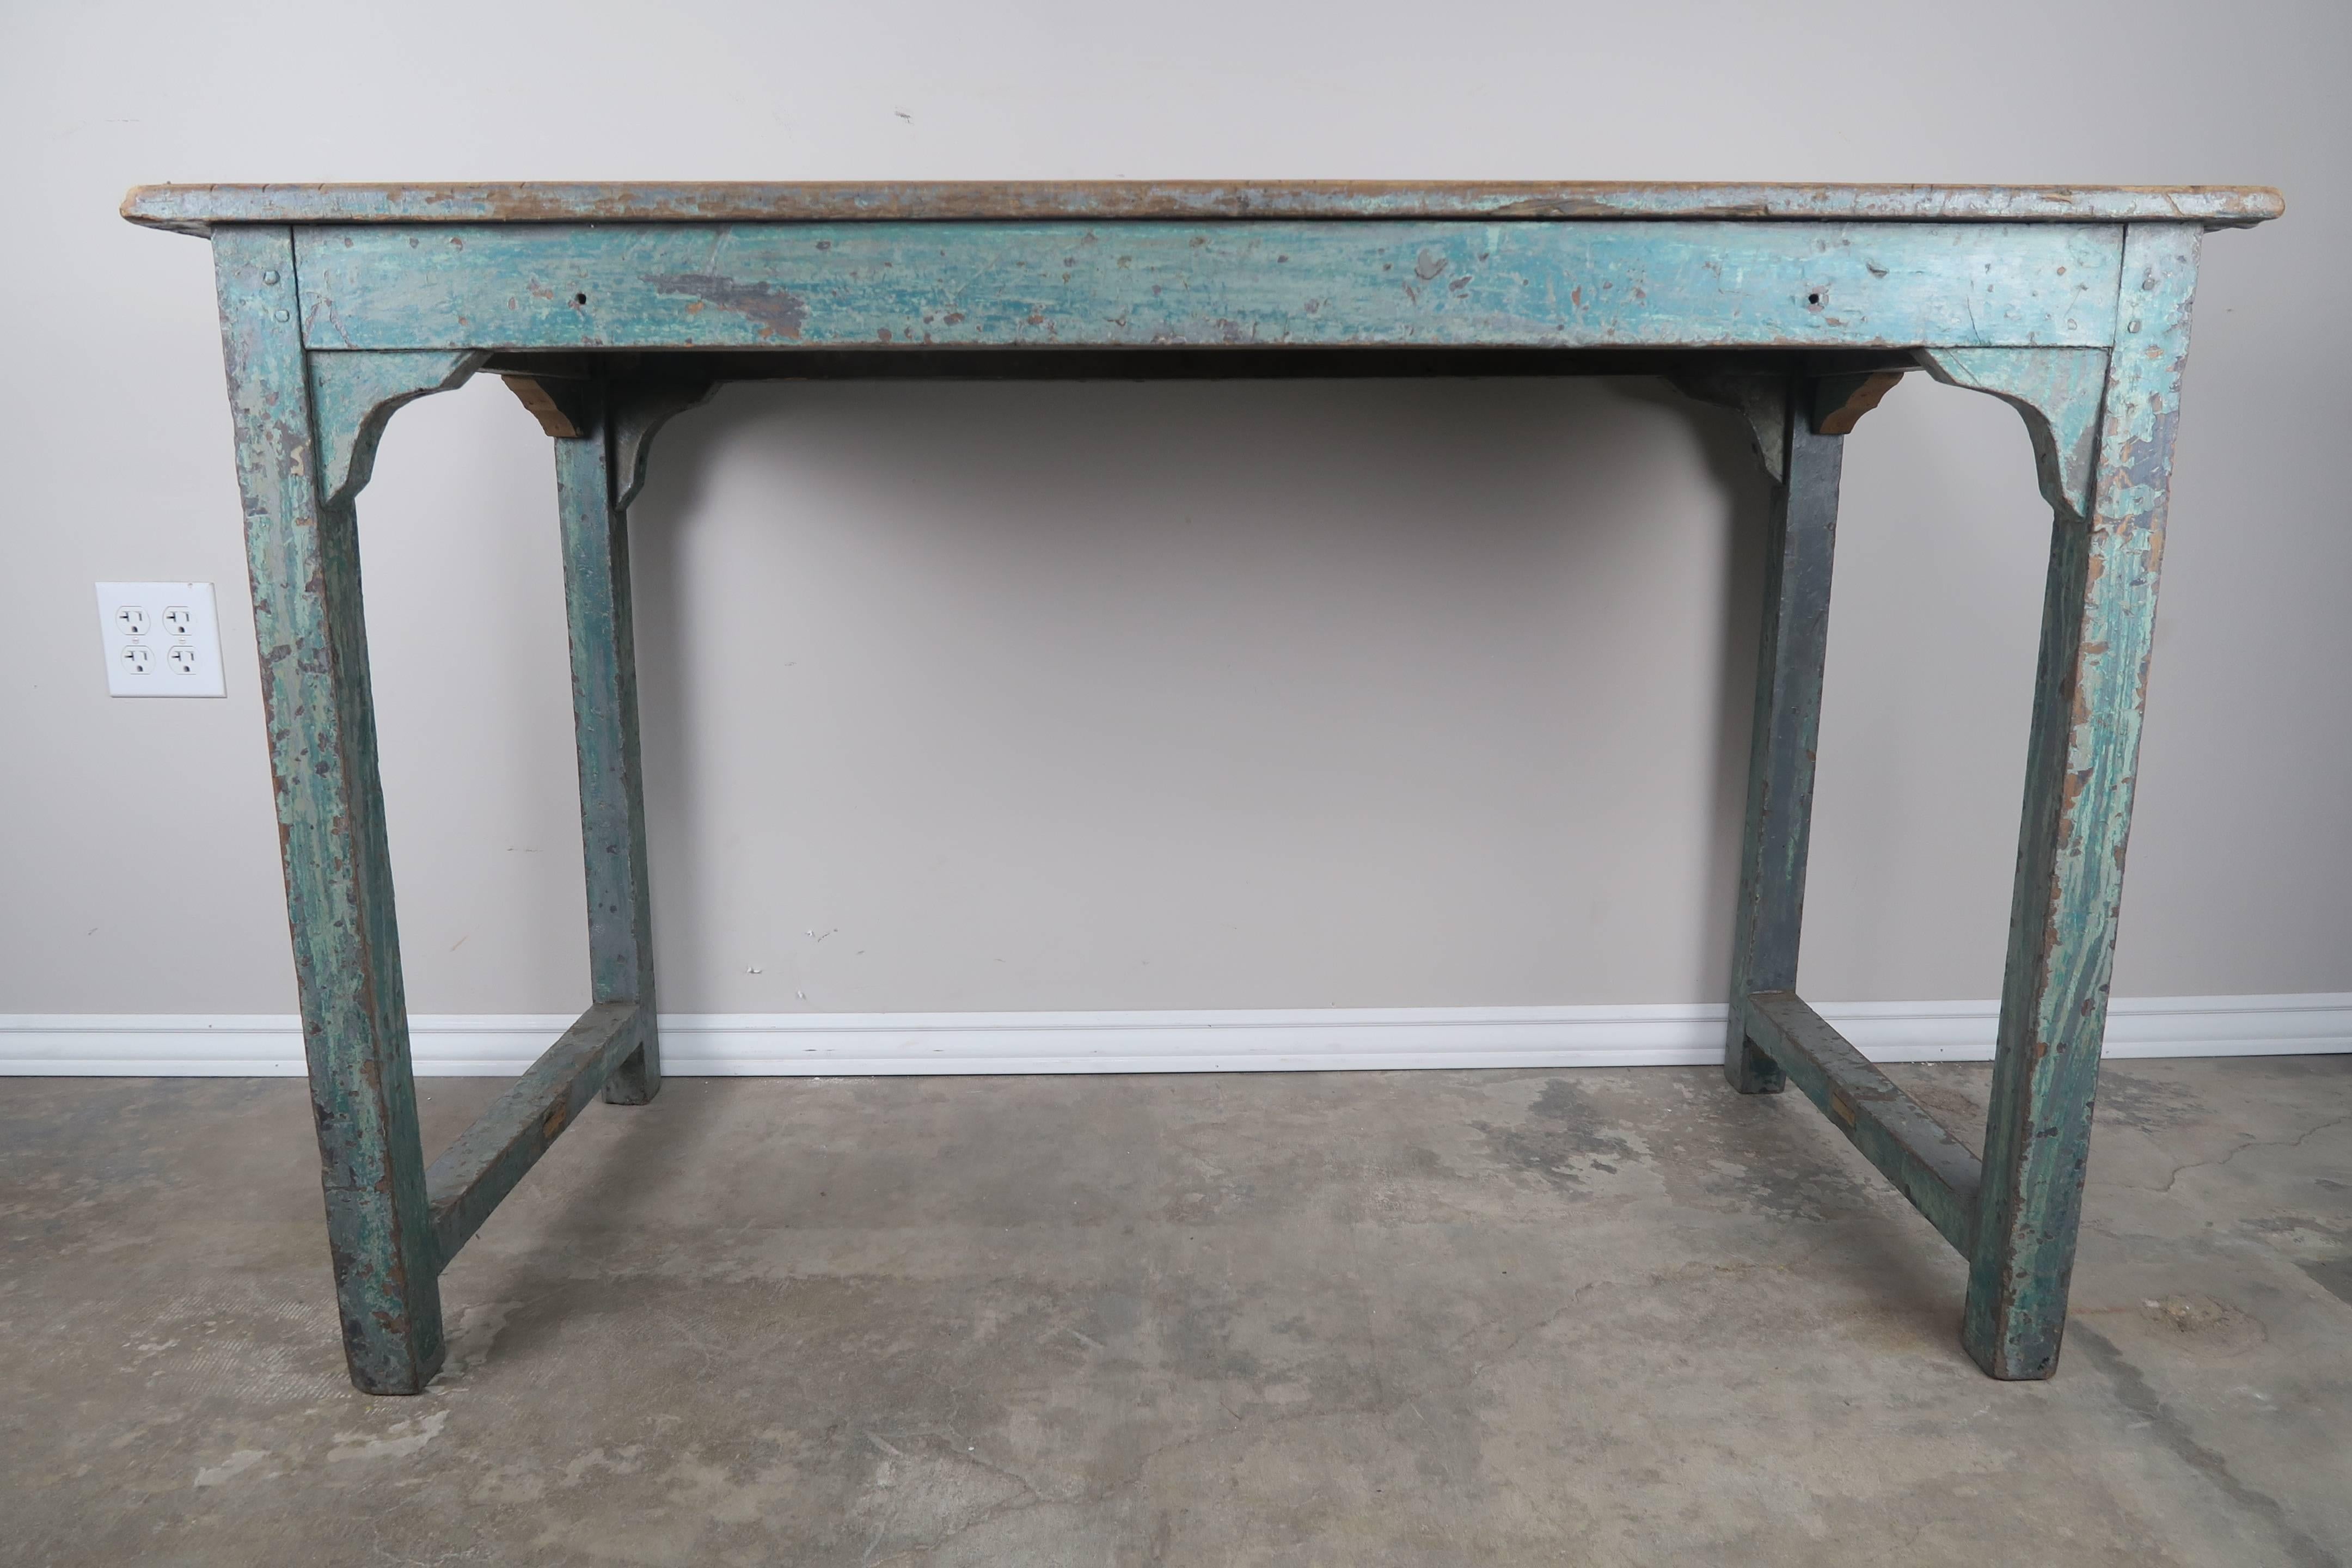 19th century Swedish Primitive style table with a blue painted base and a natural wood top.